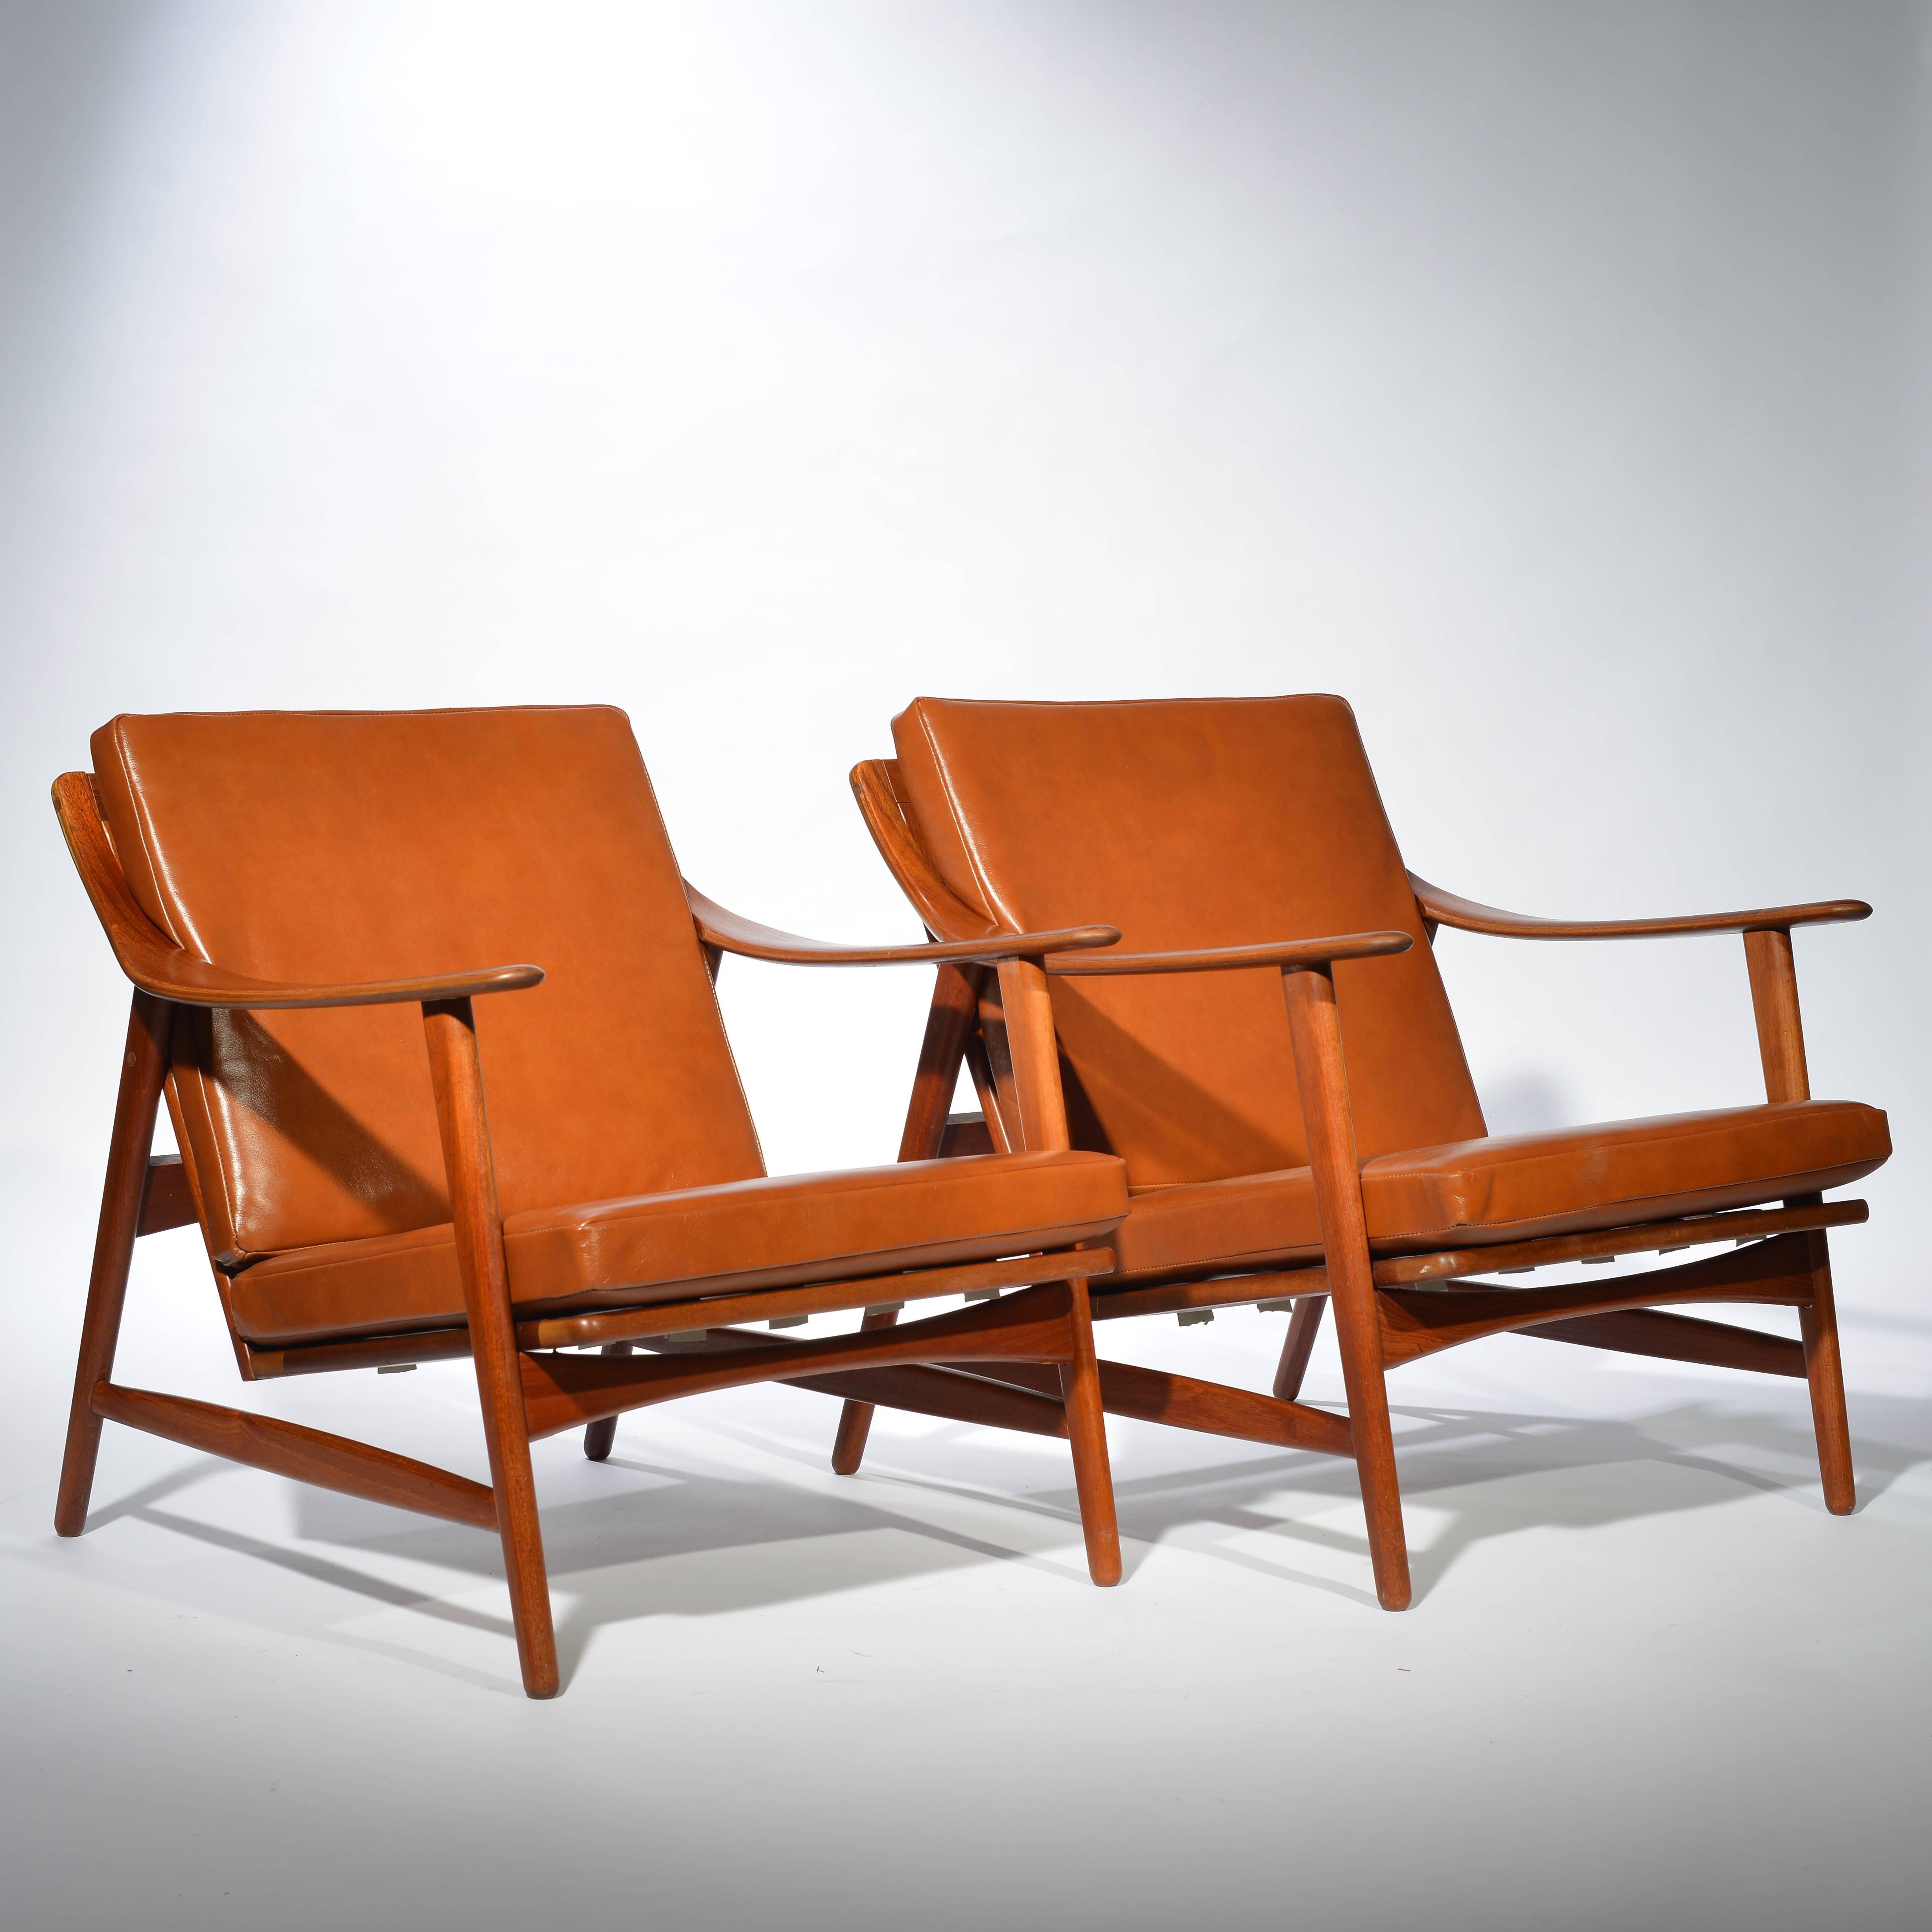 Very early and rare Arne Hovmand-Olsen for Mogens Kold teak and leather lounge chairs.
Fully restored wood and strapping, new leather cushions.